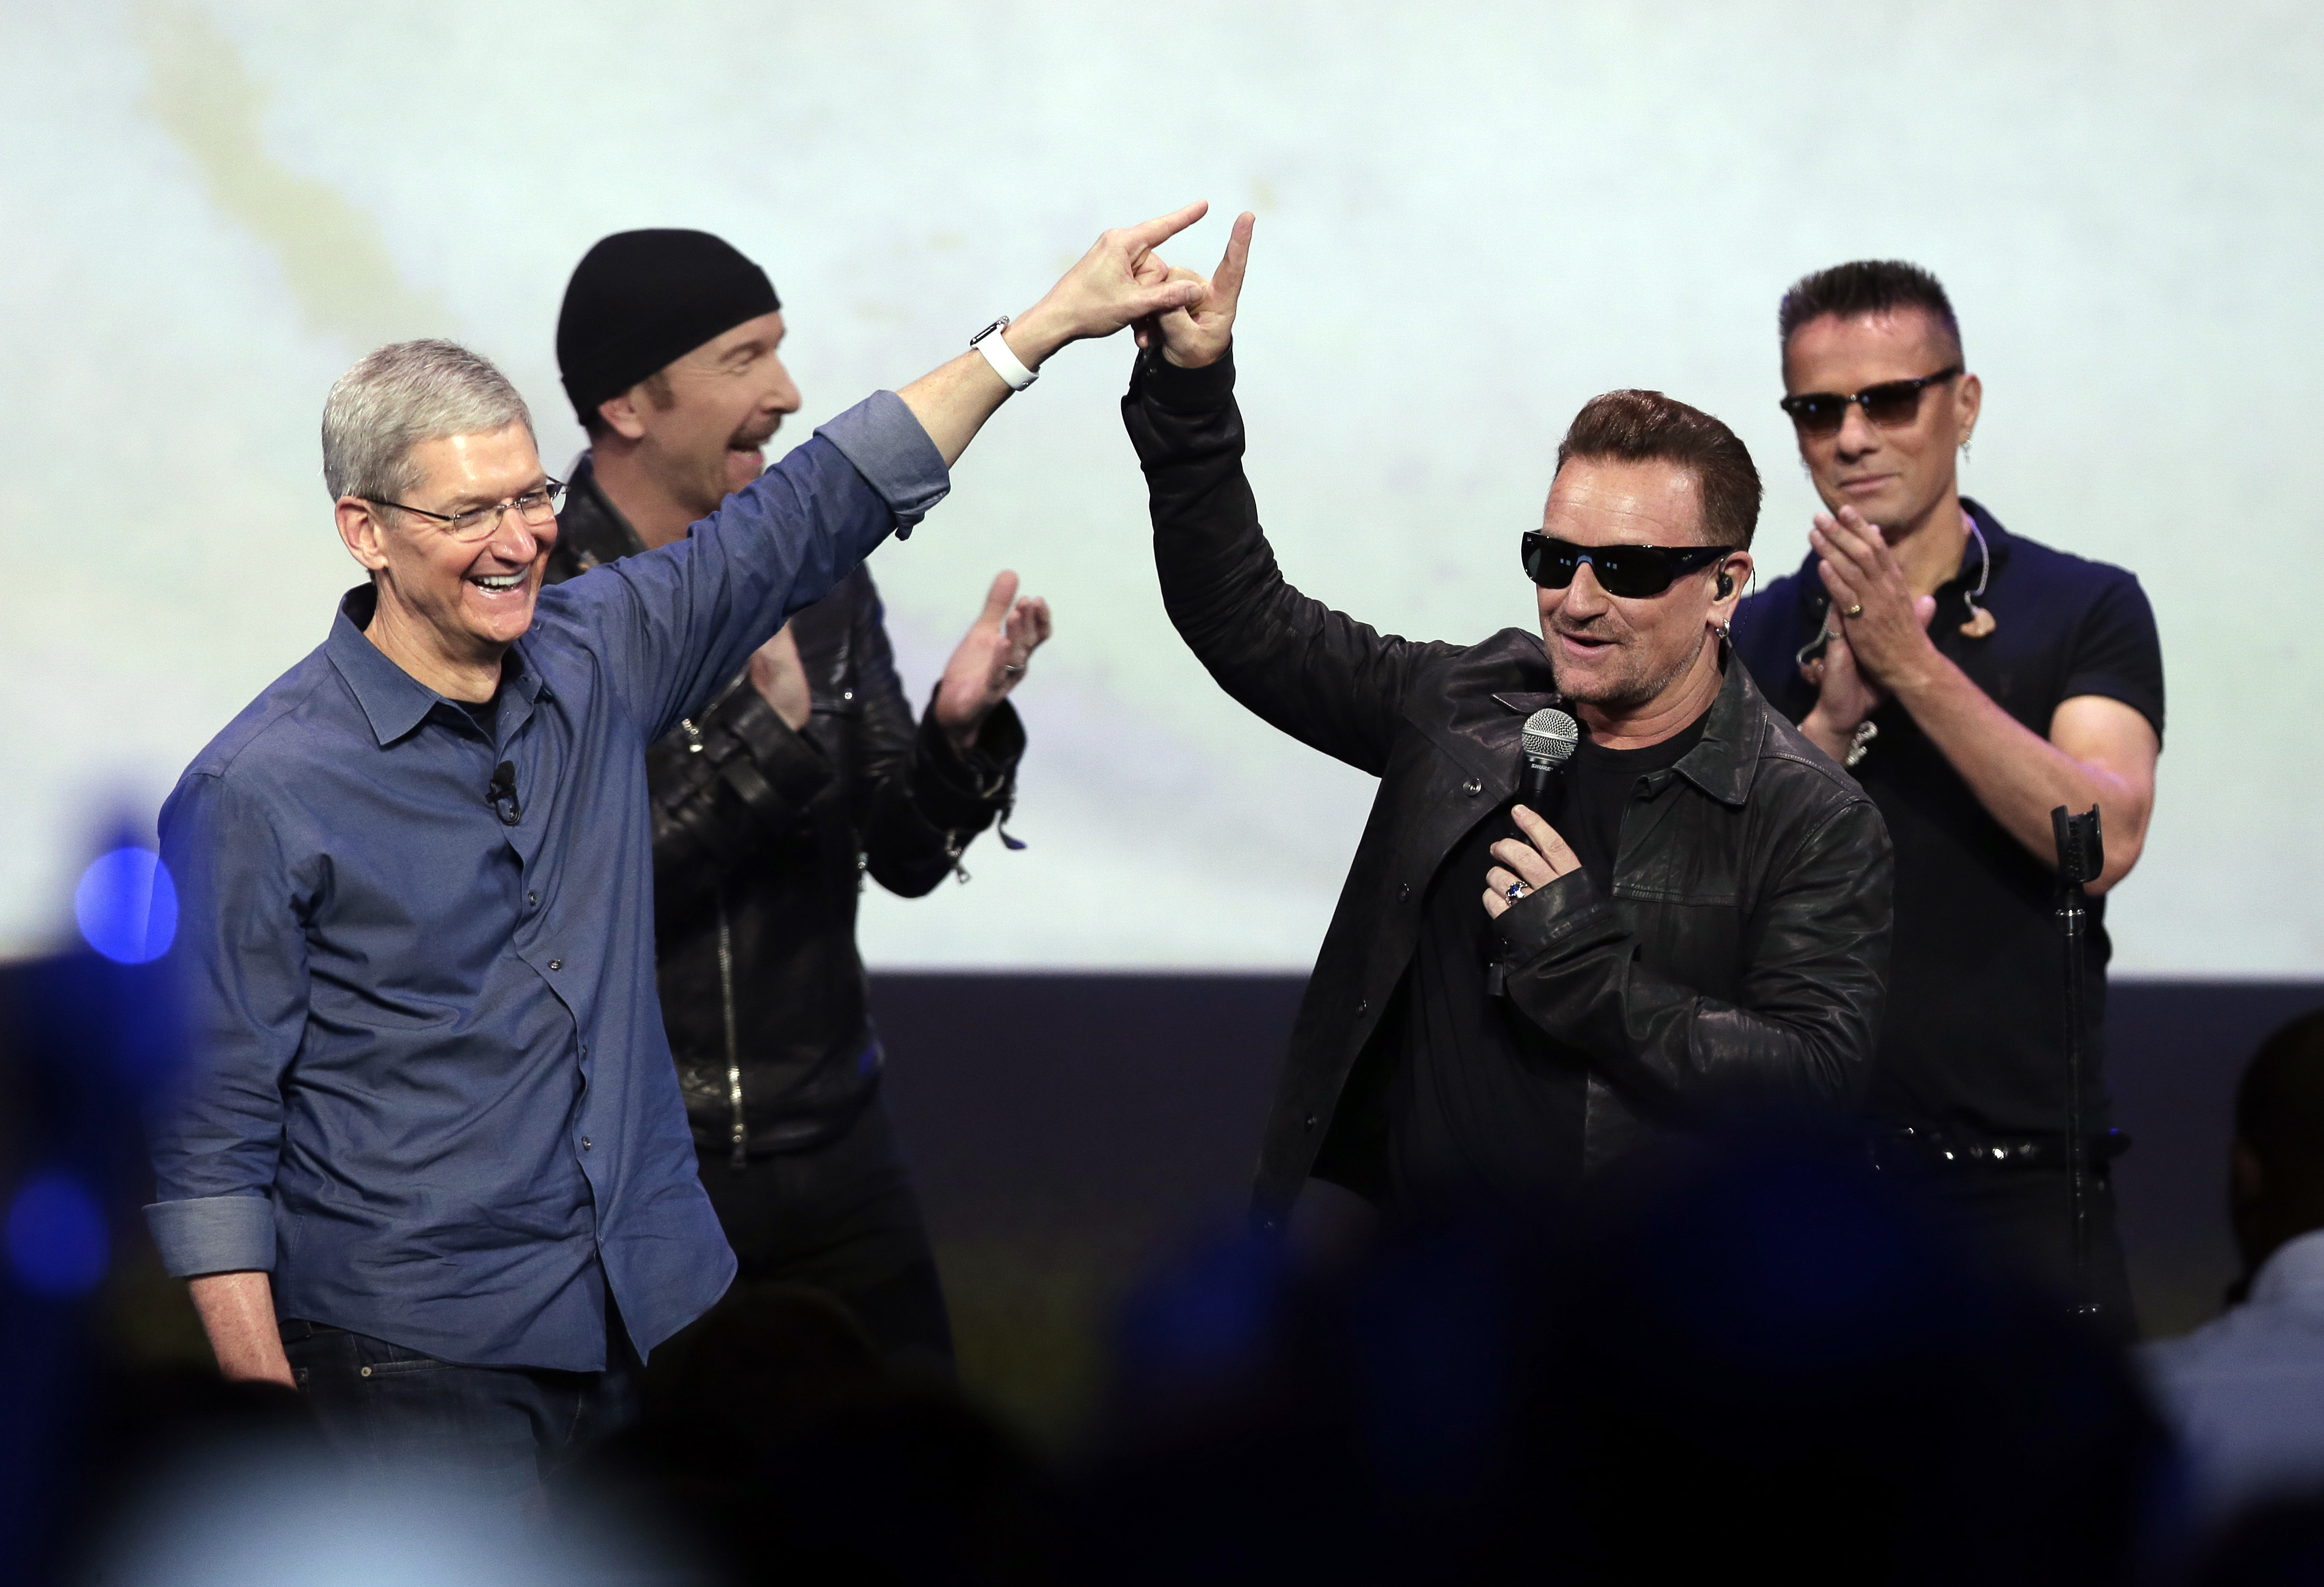 In this Sept. 9, 2014 file photo, Apple CEO Tim Cook (L) greets Bono from the band U2 after they preformed at the end of the Apple event in Cupertino, Calif. (Marcio Jose Sanchez—AP)